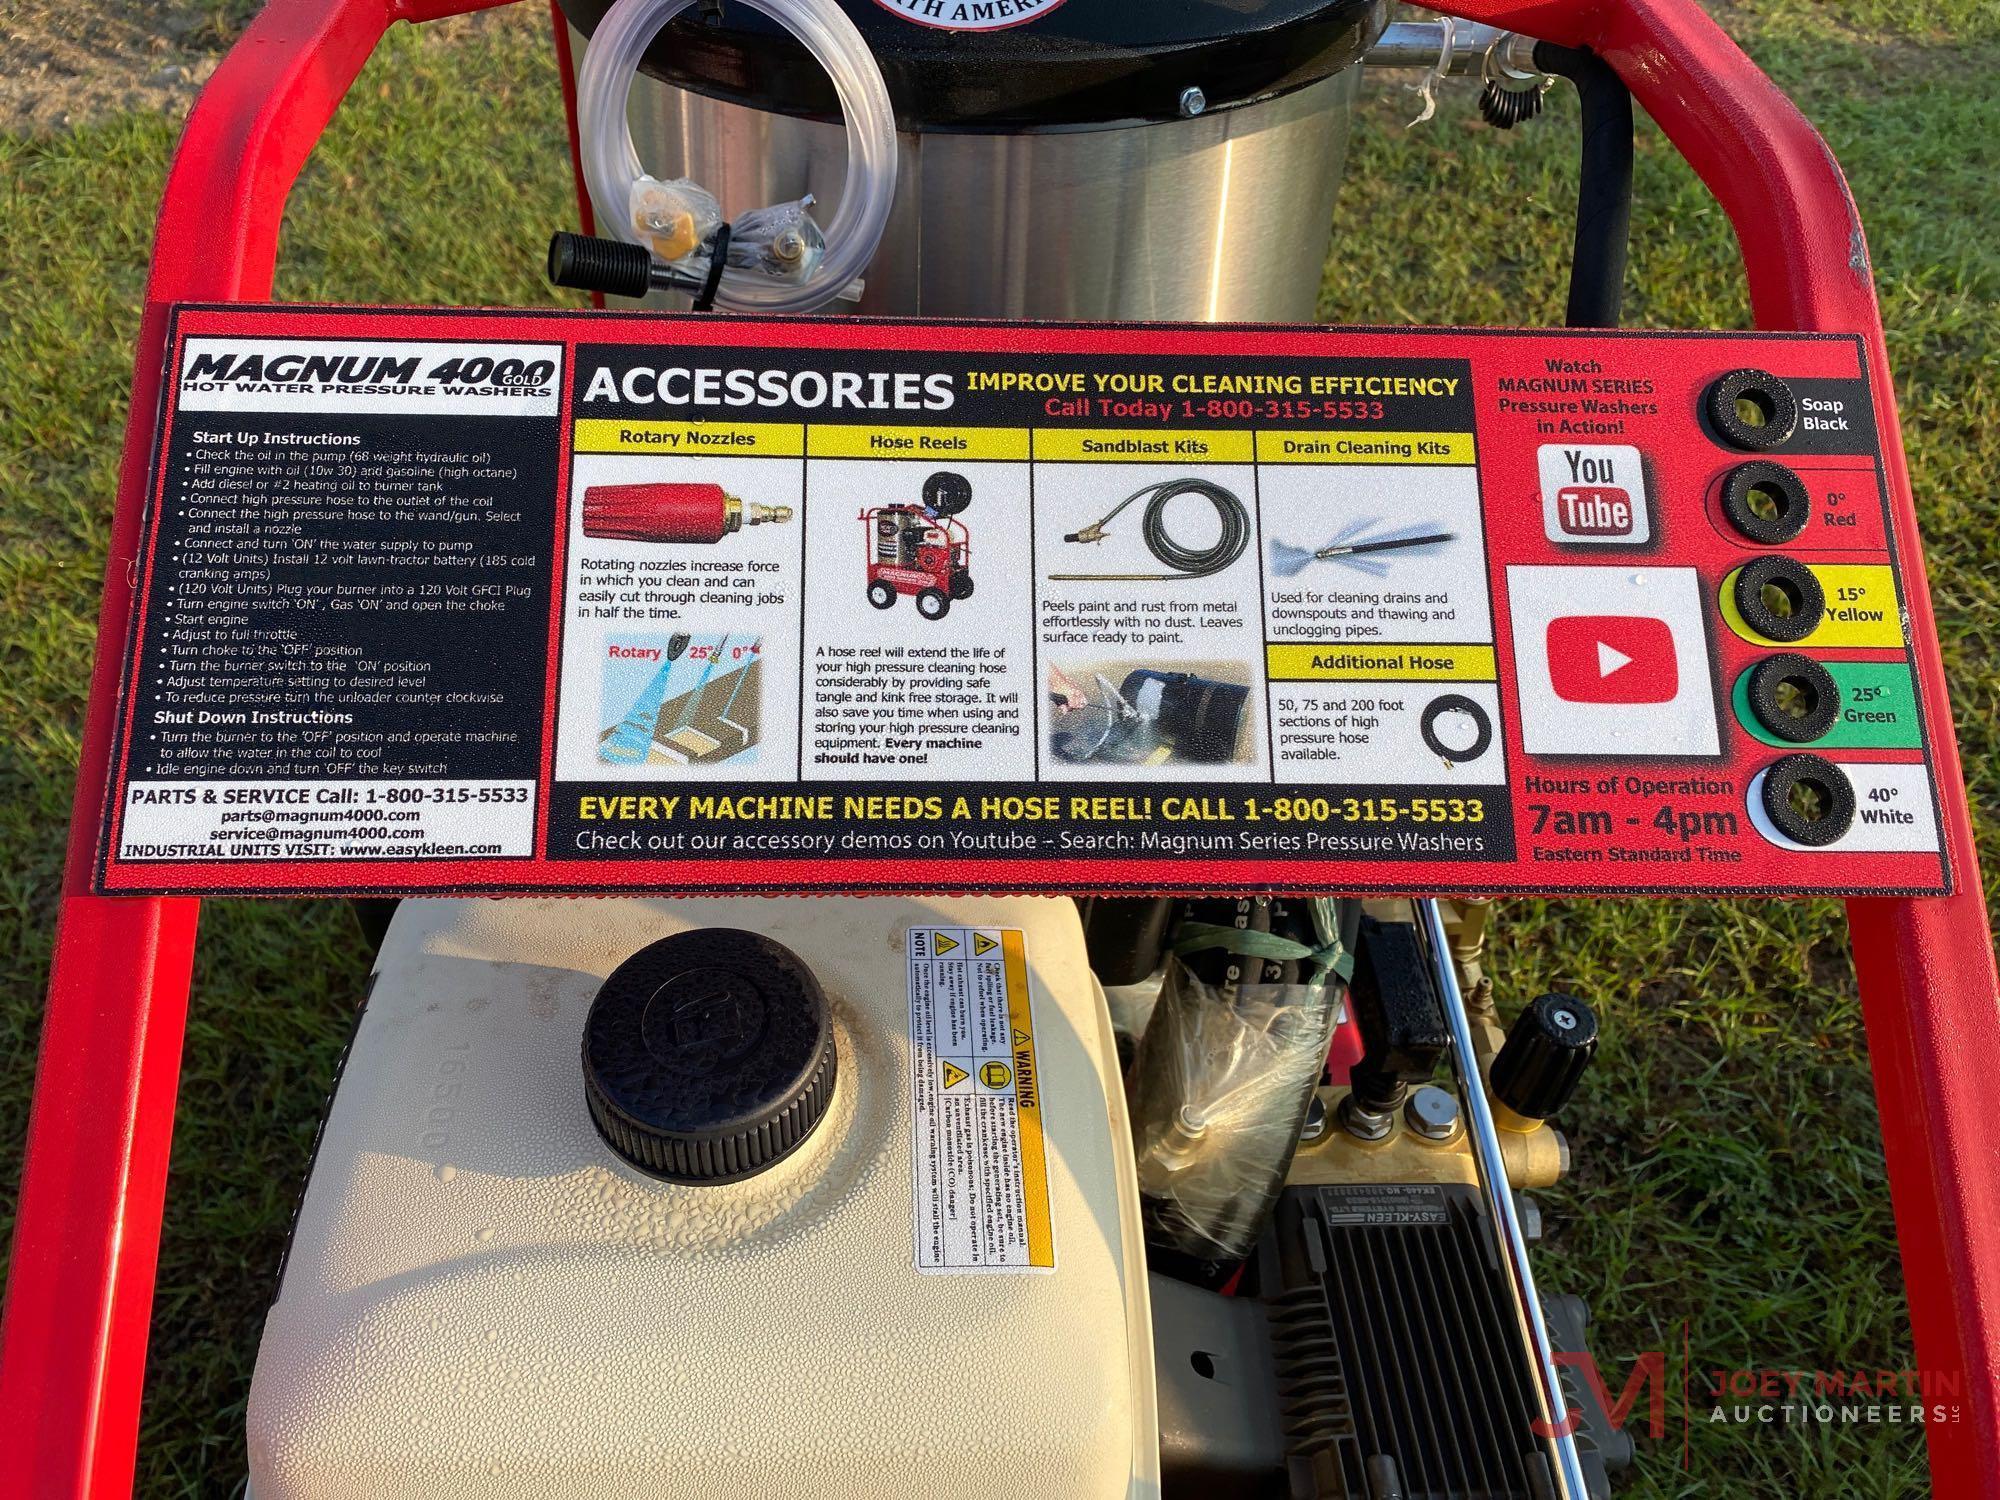 NEW MAGNUM 4000 SERIES GOLD PORTABLE HOT WATER PRESSURE WASHER